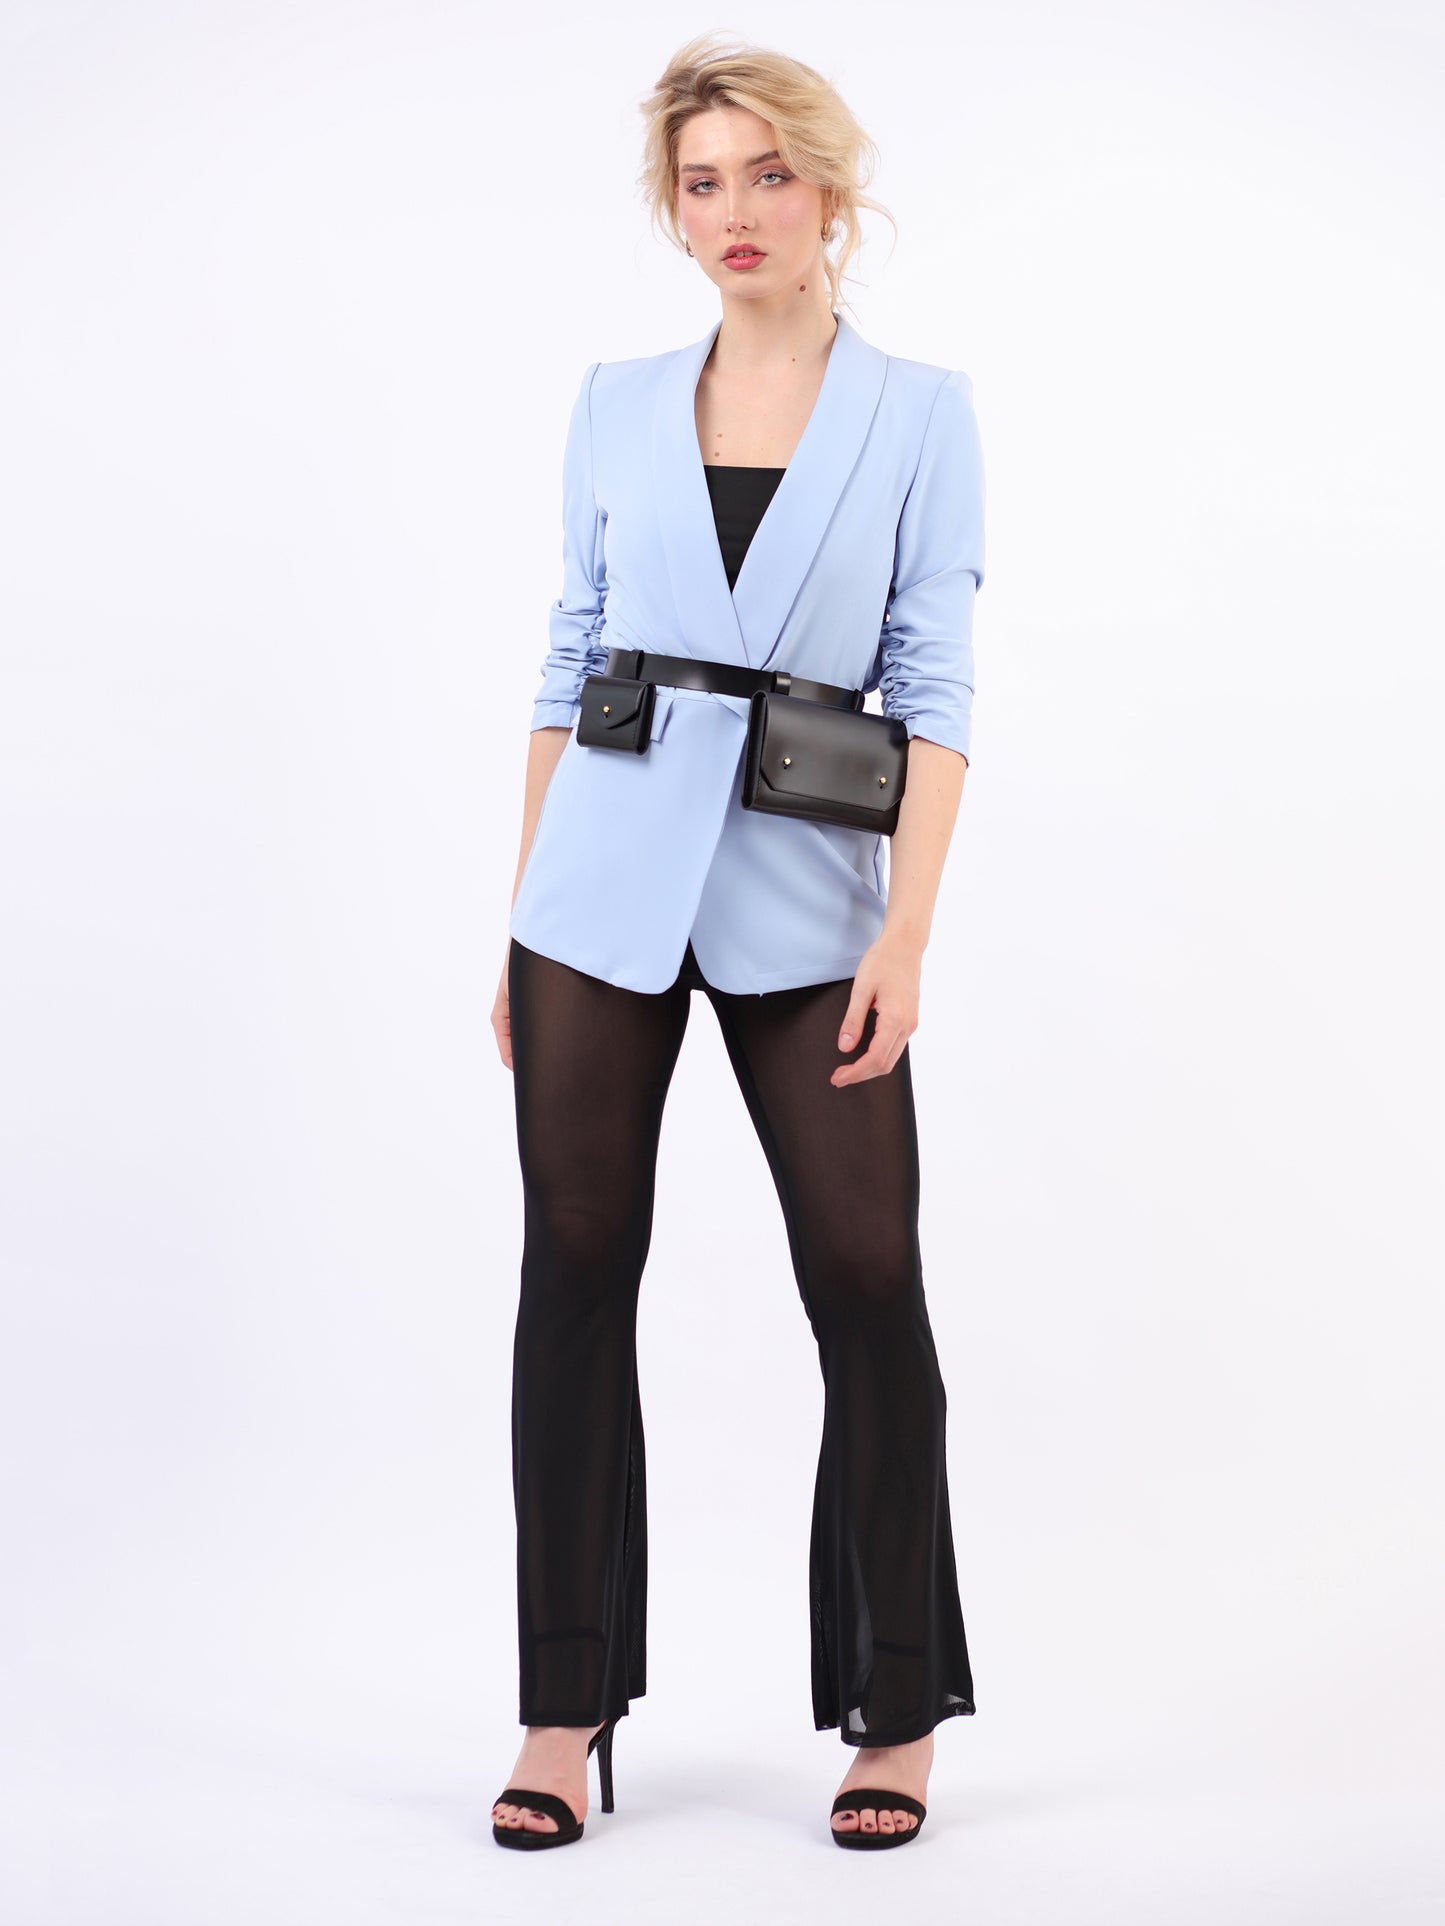 Black double belt bag fitted on woman wearing blue blazer and black trousers.